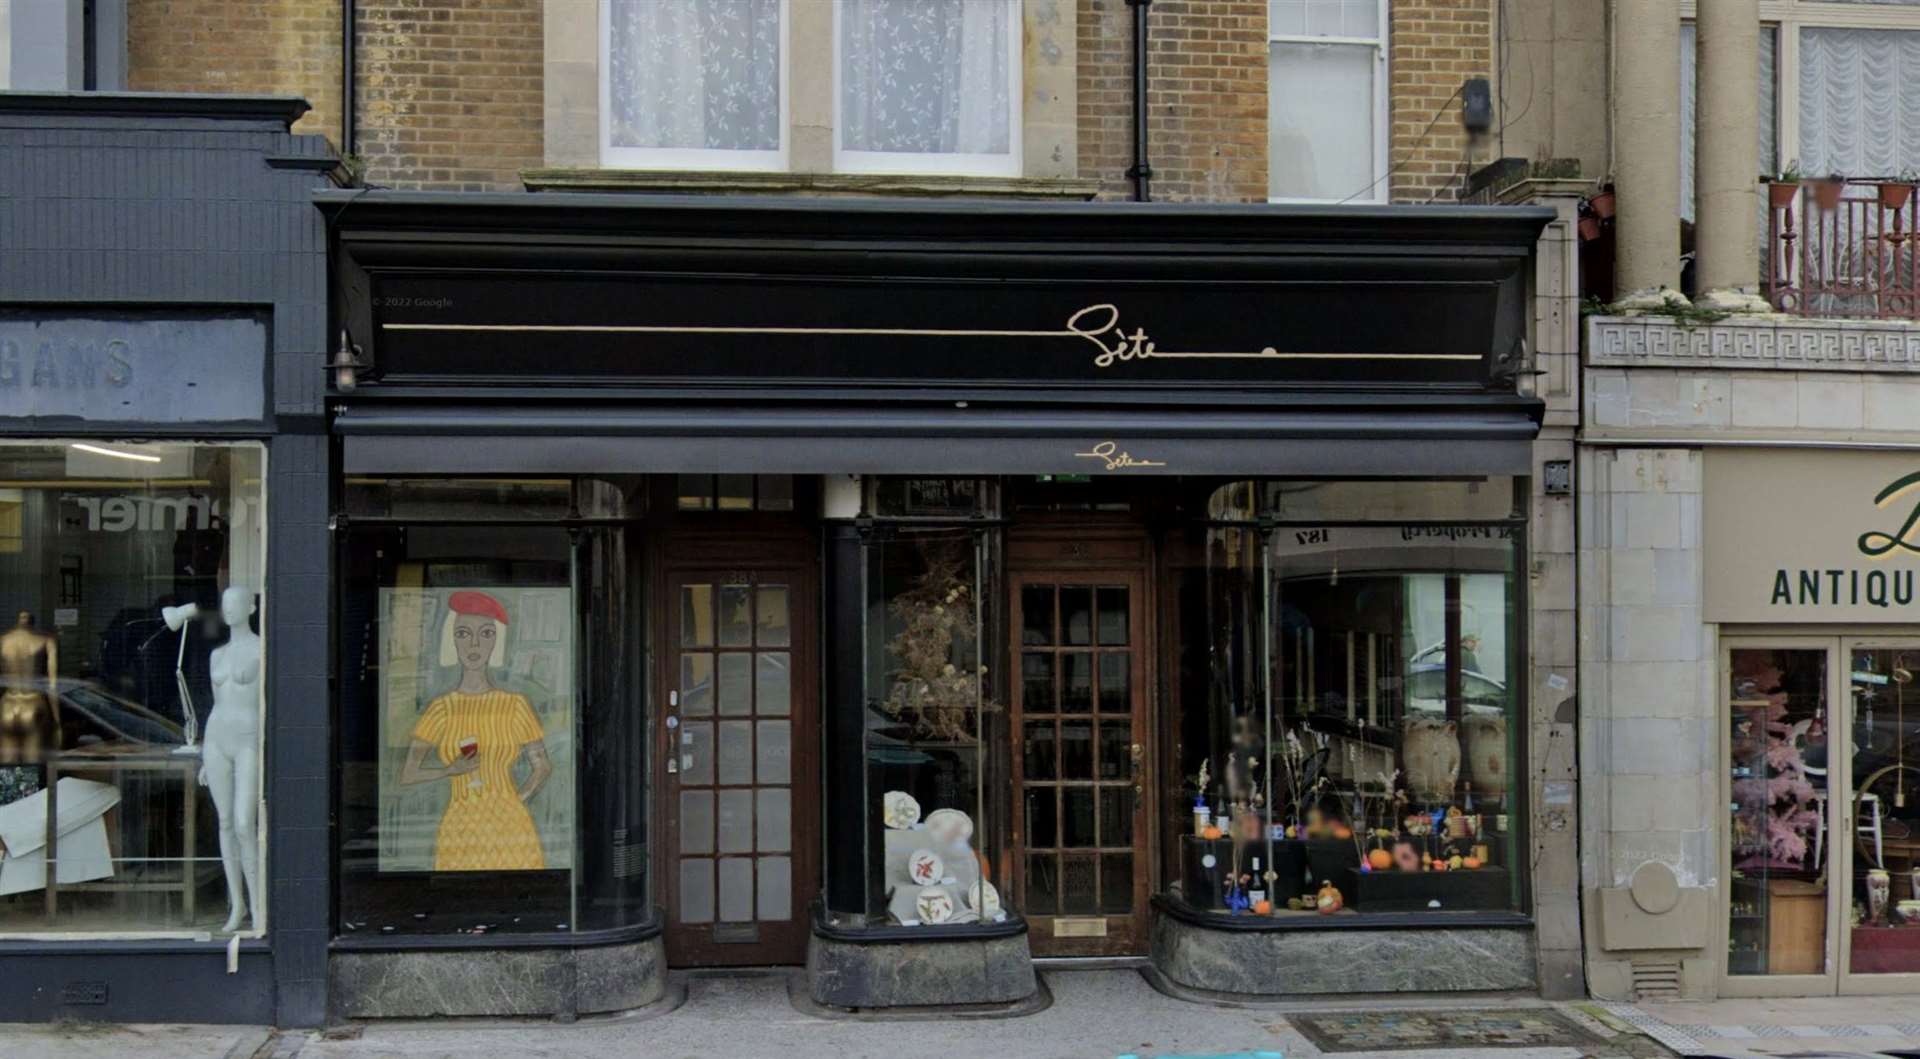 Ms Ribbe's new wine shop, bar and eatery in Cliftonville, Thanet. Picture: Google Maps